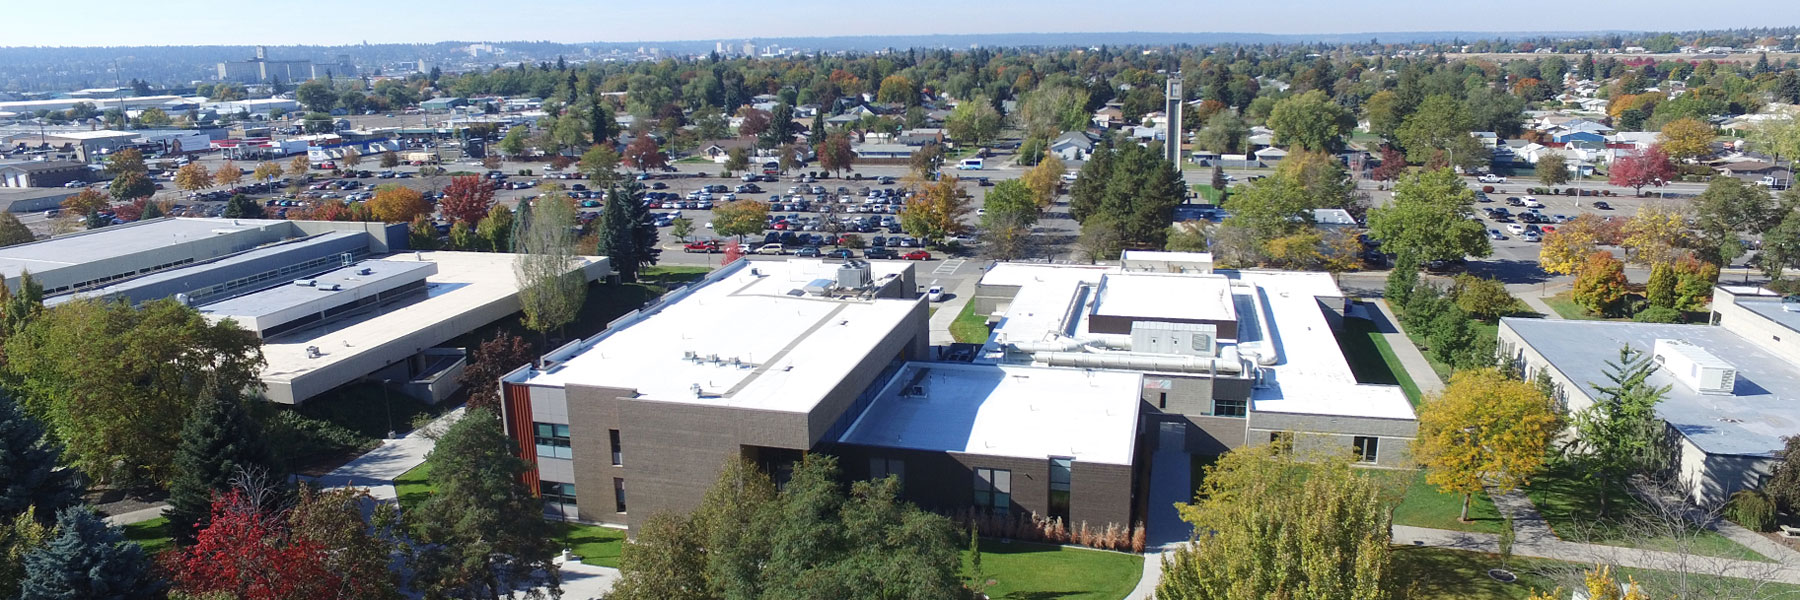 Aerial view showing part of the west side of the campus